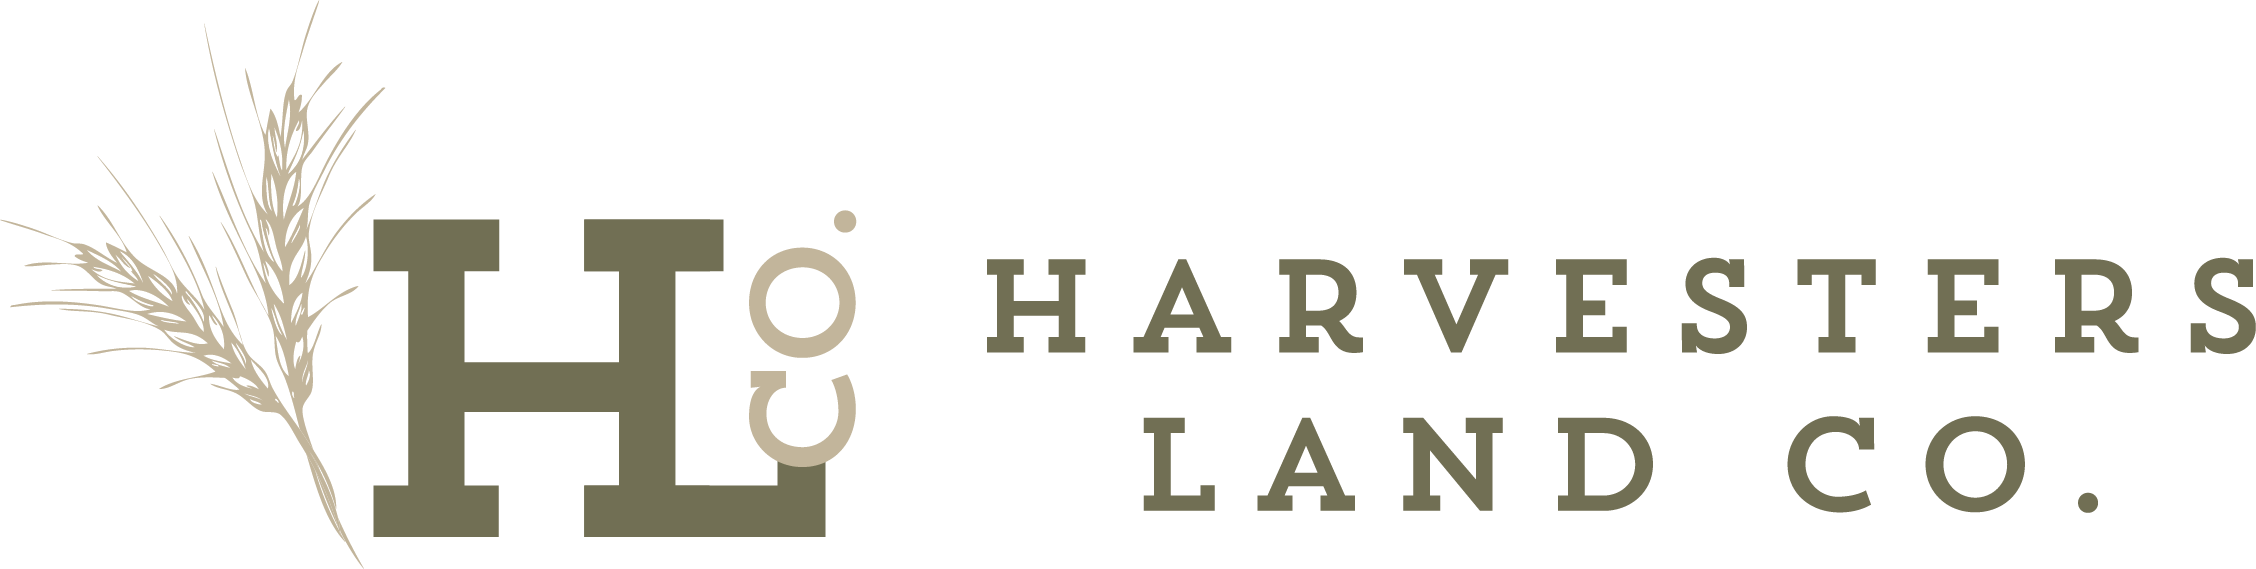 Harvesters Land Co.